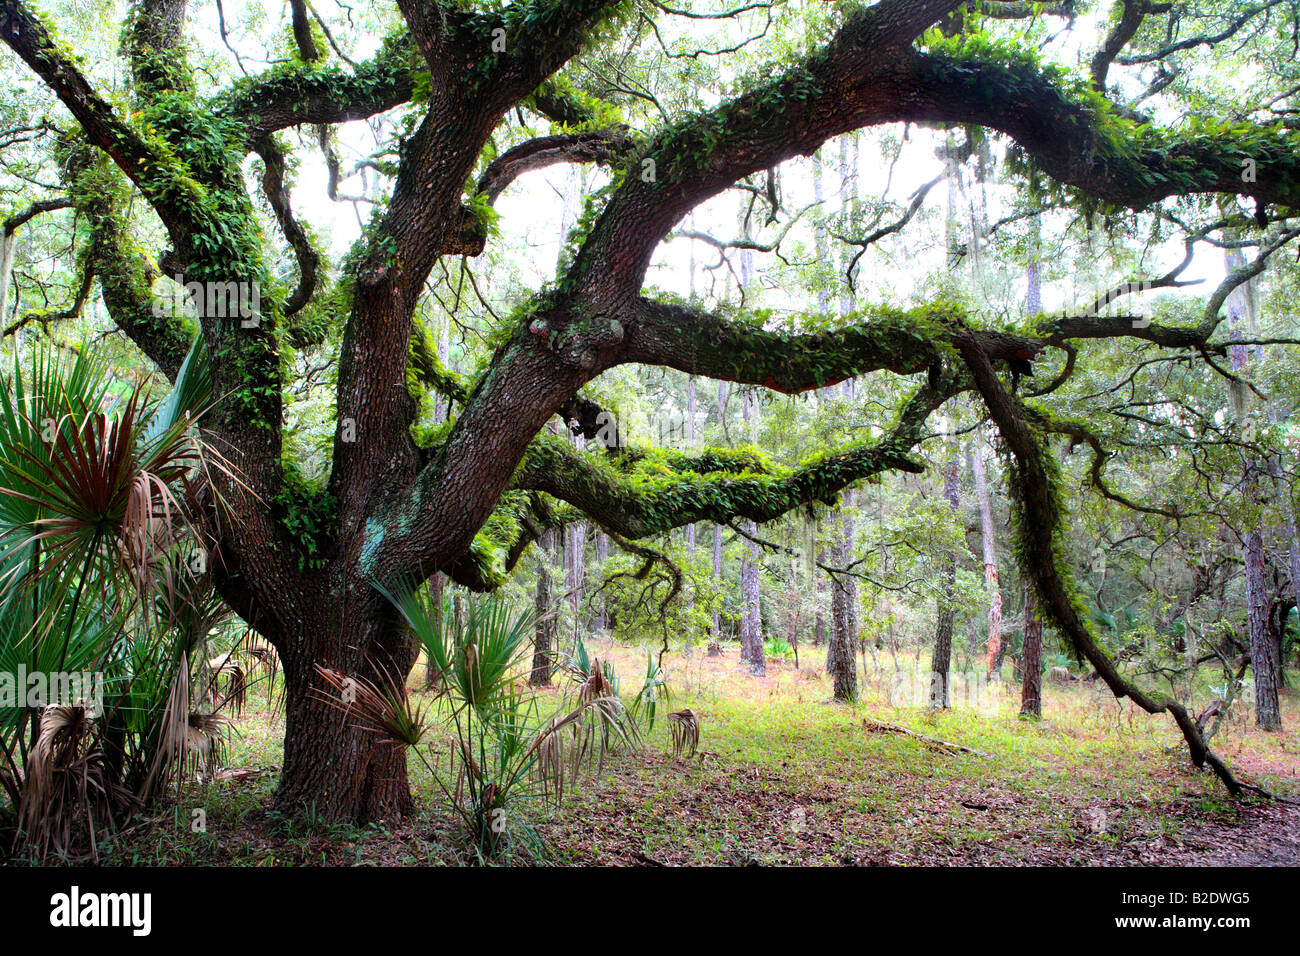 LIVE OAK QUERCUS VIRGINIANA COVERED WITH RESURRECTION FERN POLYPODIUM POLYPODIOIDES IN A FOREST ON CUMBERLAND ISLAND GEORGIA USA Stock Photo